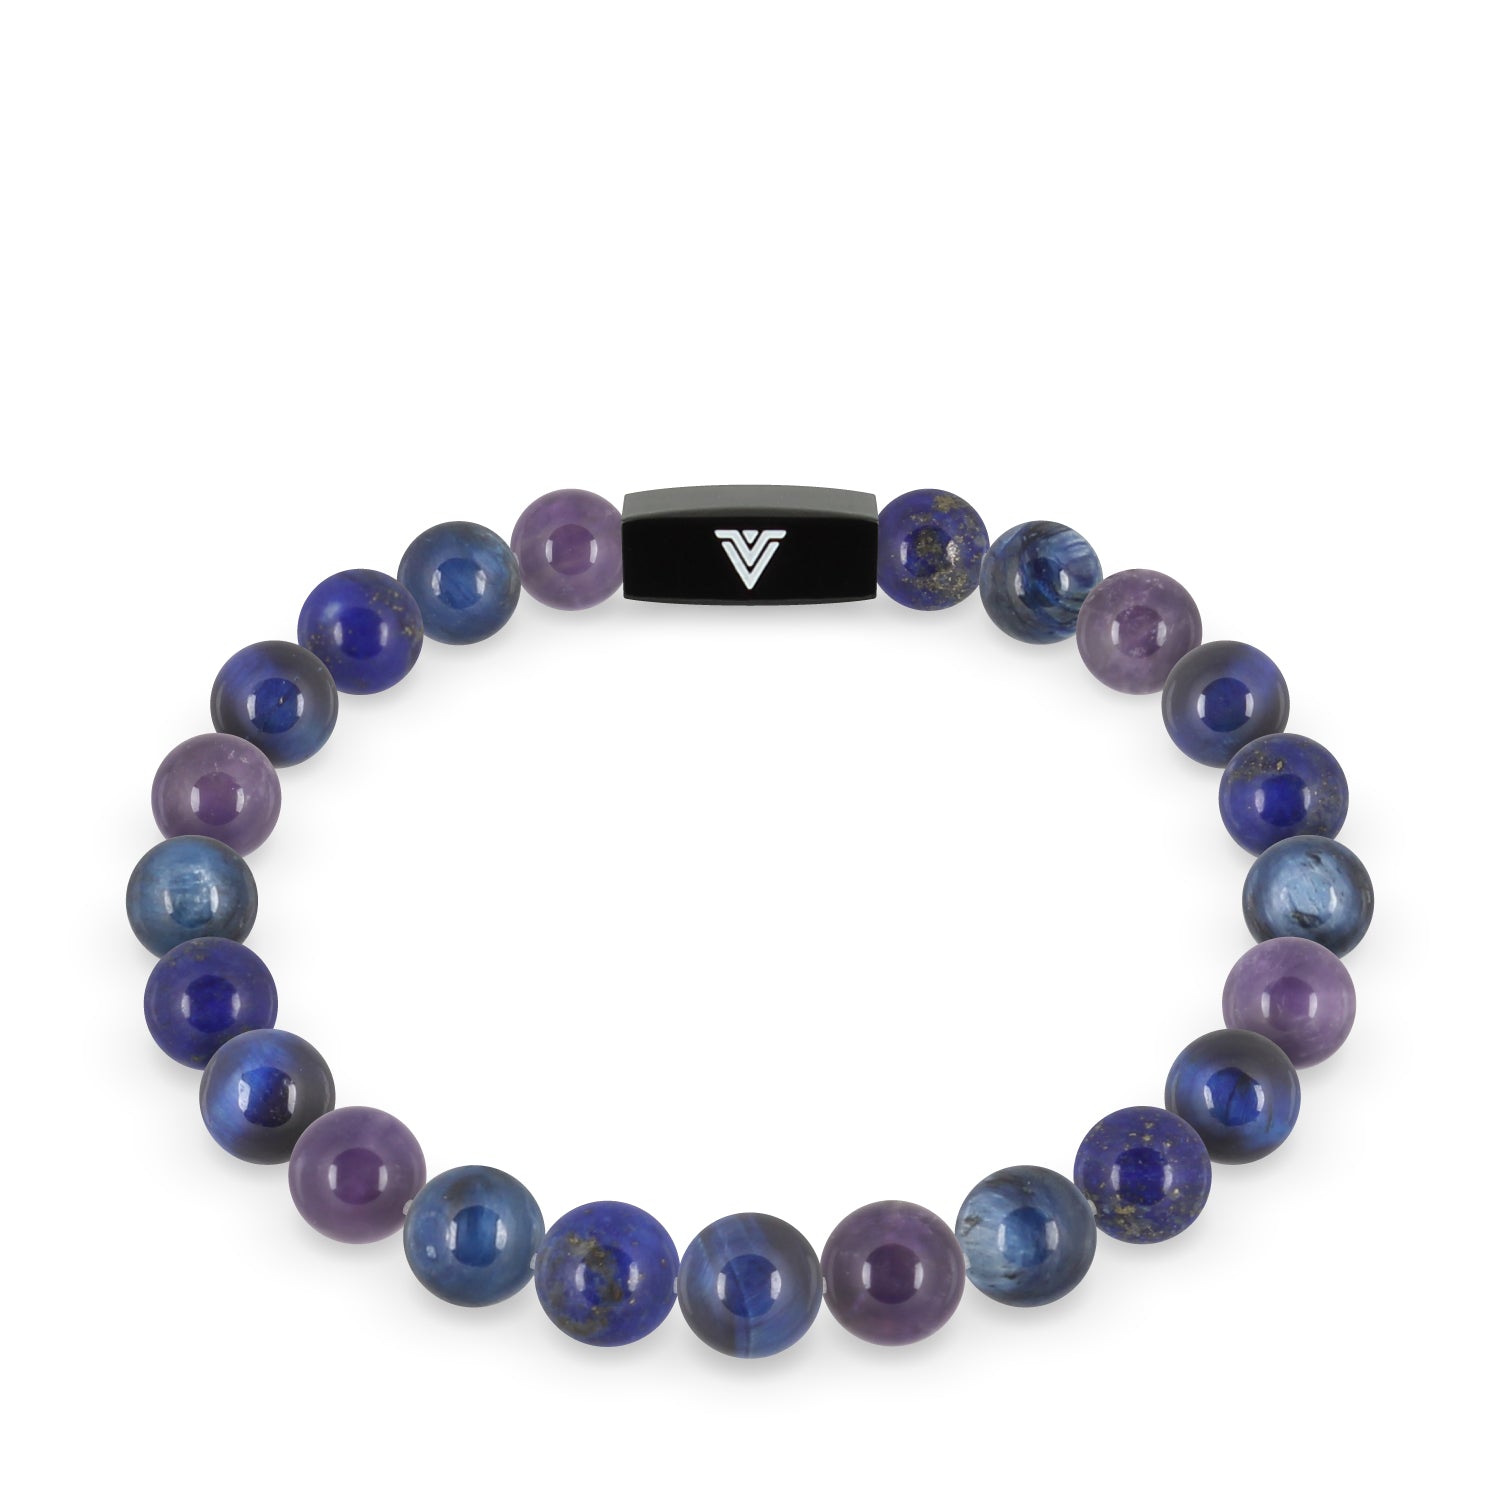 Front view of an 8mm Third Eye Chakra crystal beaded stretch bracelet with black stainless steel logo bead made by Voltlin